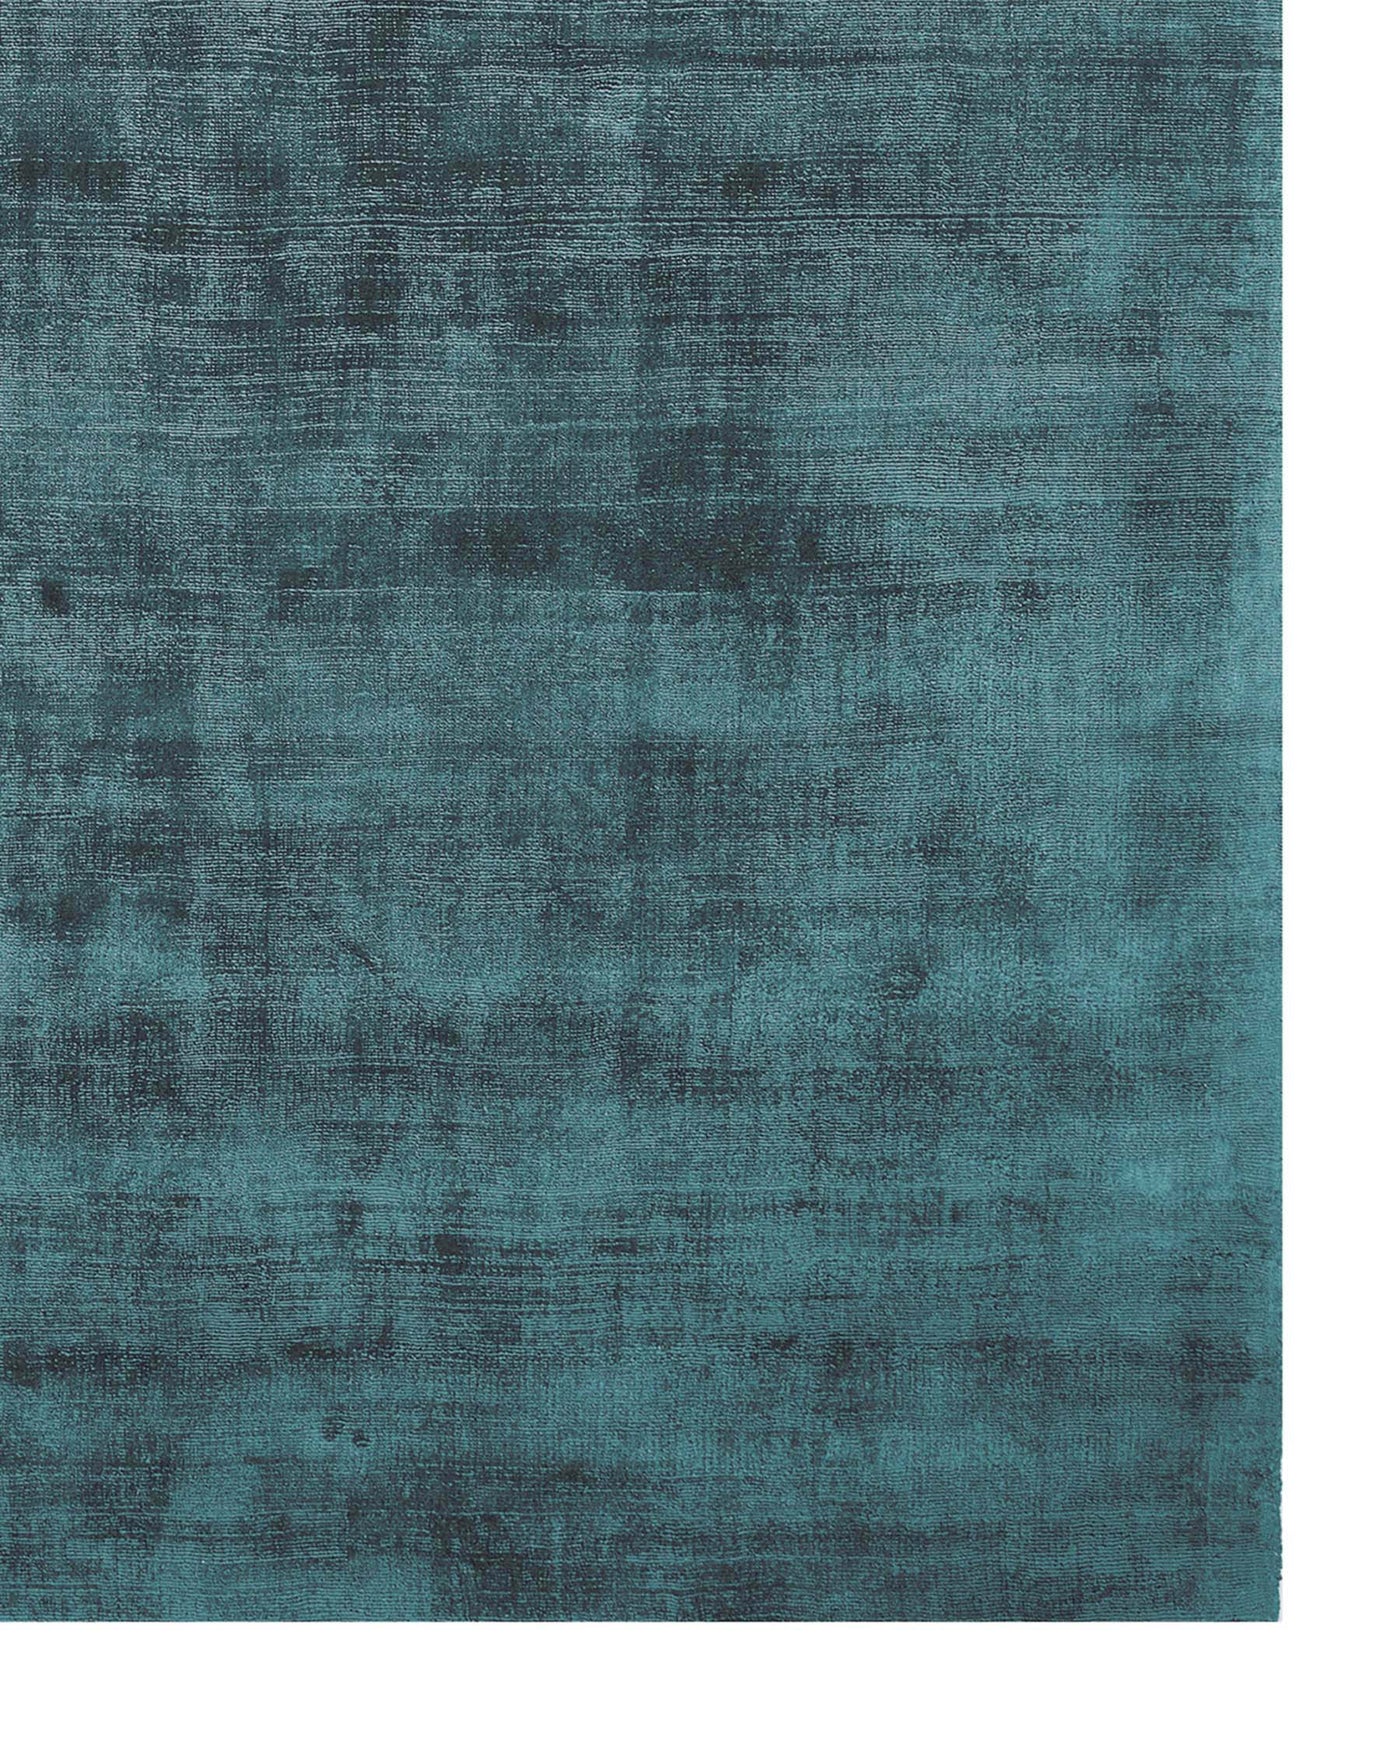 The image displays a textured deep teal area rug with a distressed, vintage look and a subtle sheen, adding both comfort and style to a room's decor.